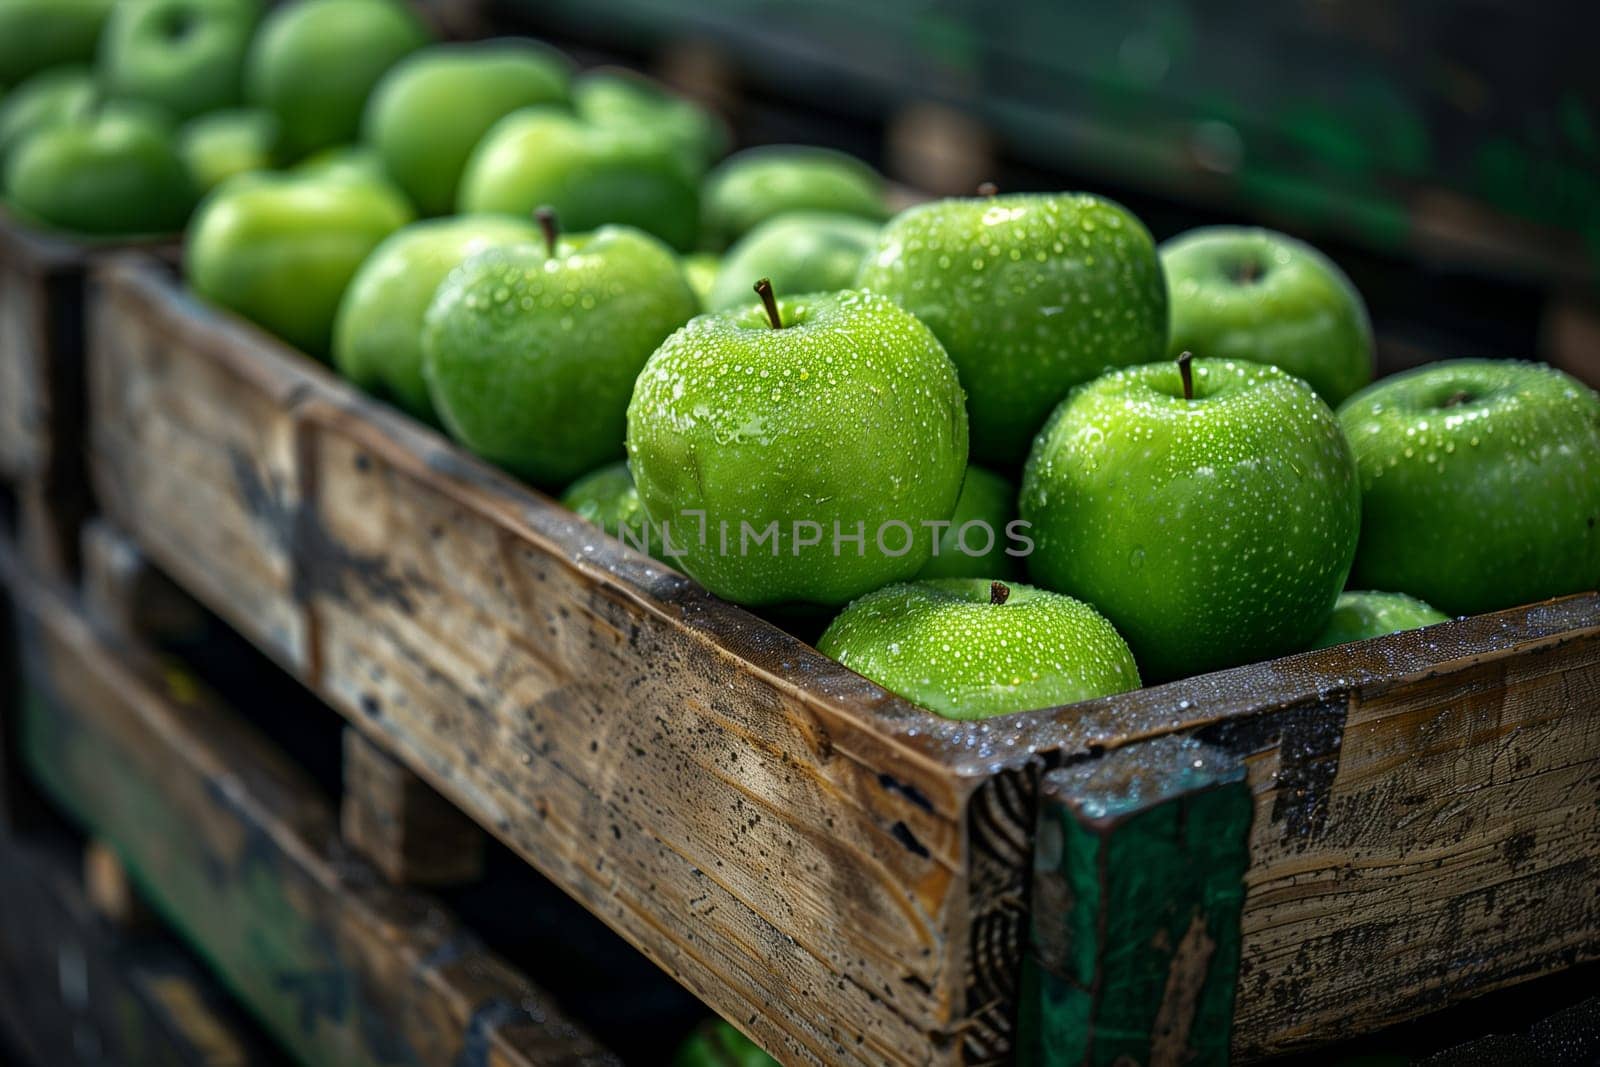 A wooden crate overflowing with vibrant green apples on a conveyor belt, ready for transport or sale.